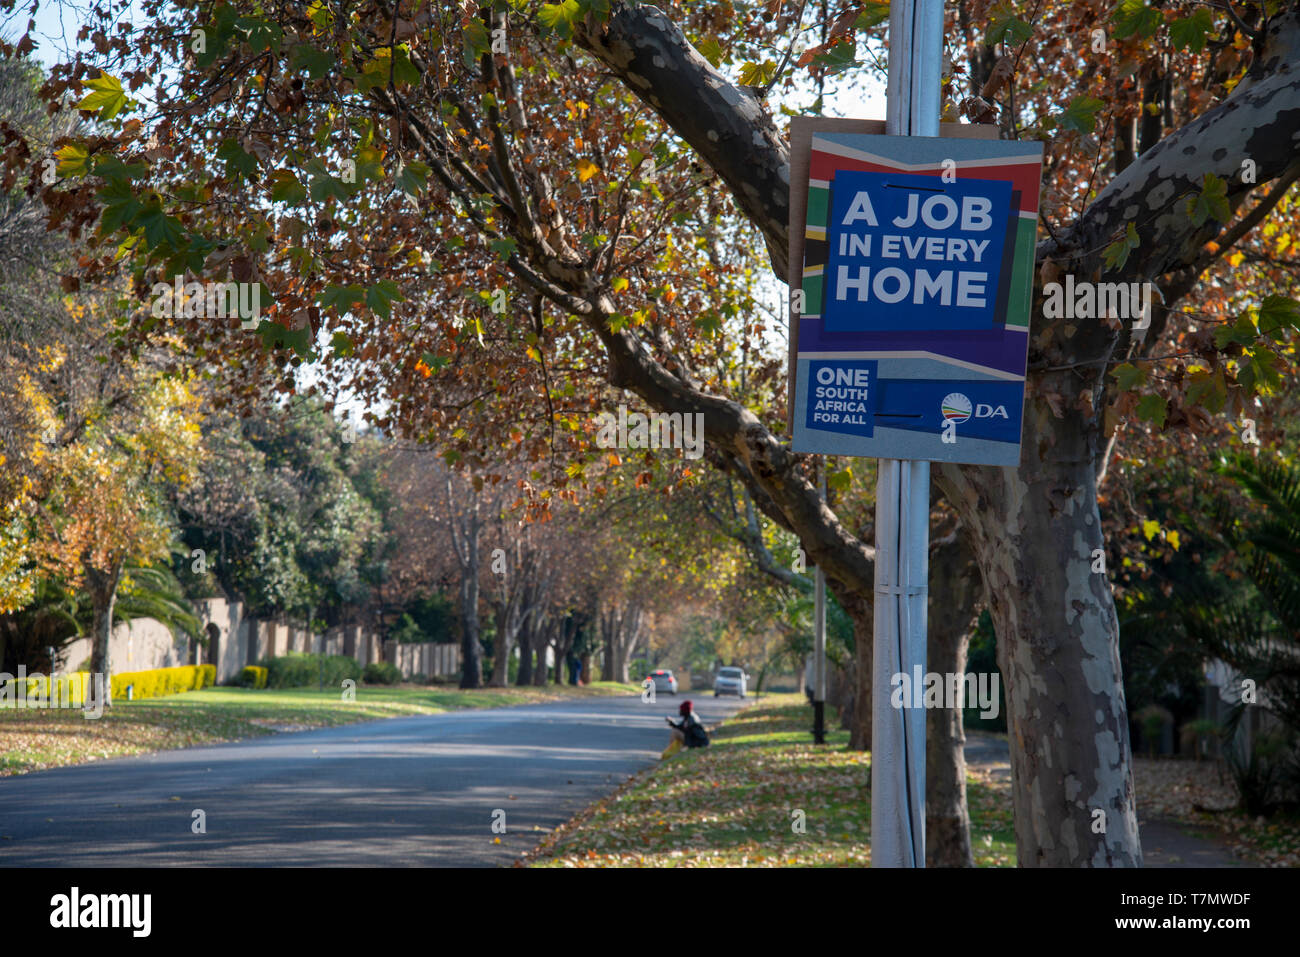 Johannesburg, South Africa, 7th May, 2019. A DA election poster is seen in Emmarentia on the eve of national elections, May 8. Credit: Eva-Lotta Jansson/Alamy Stock Photo